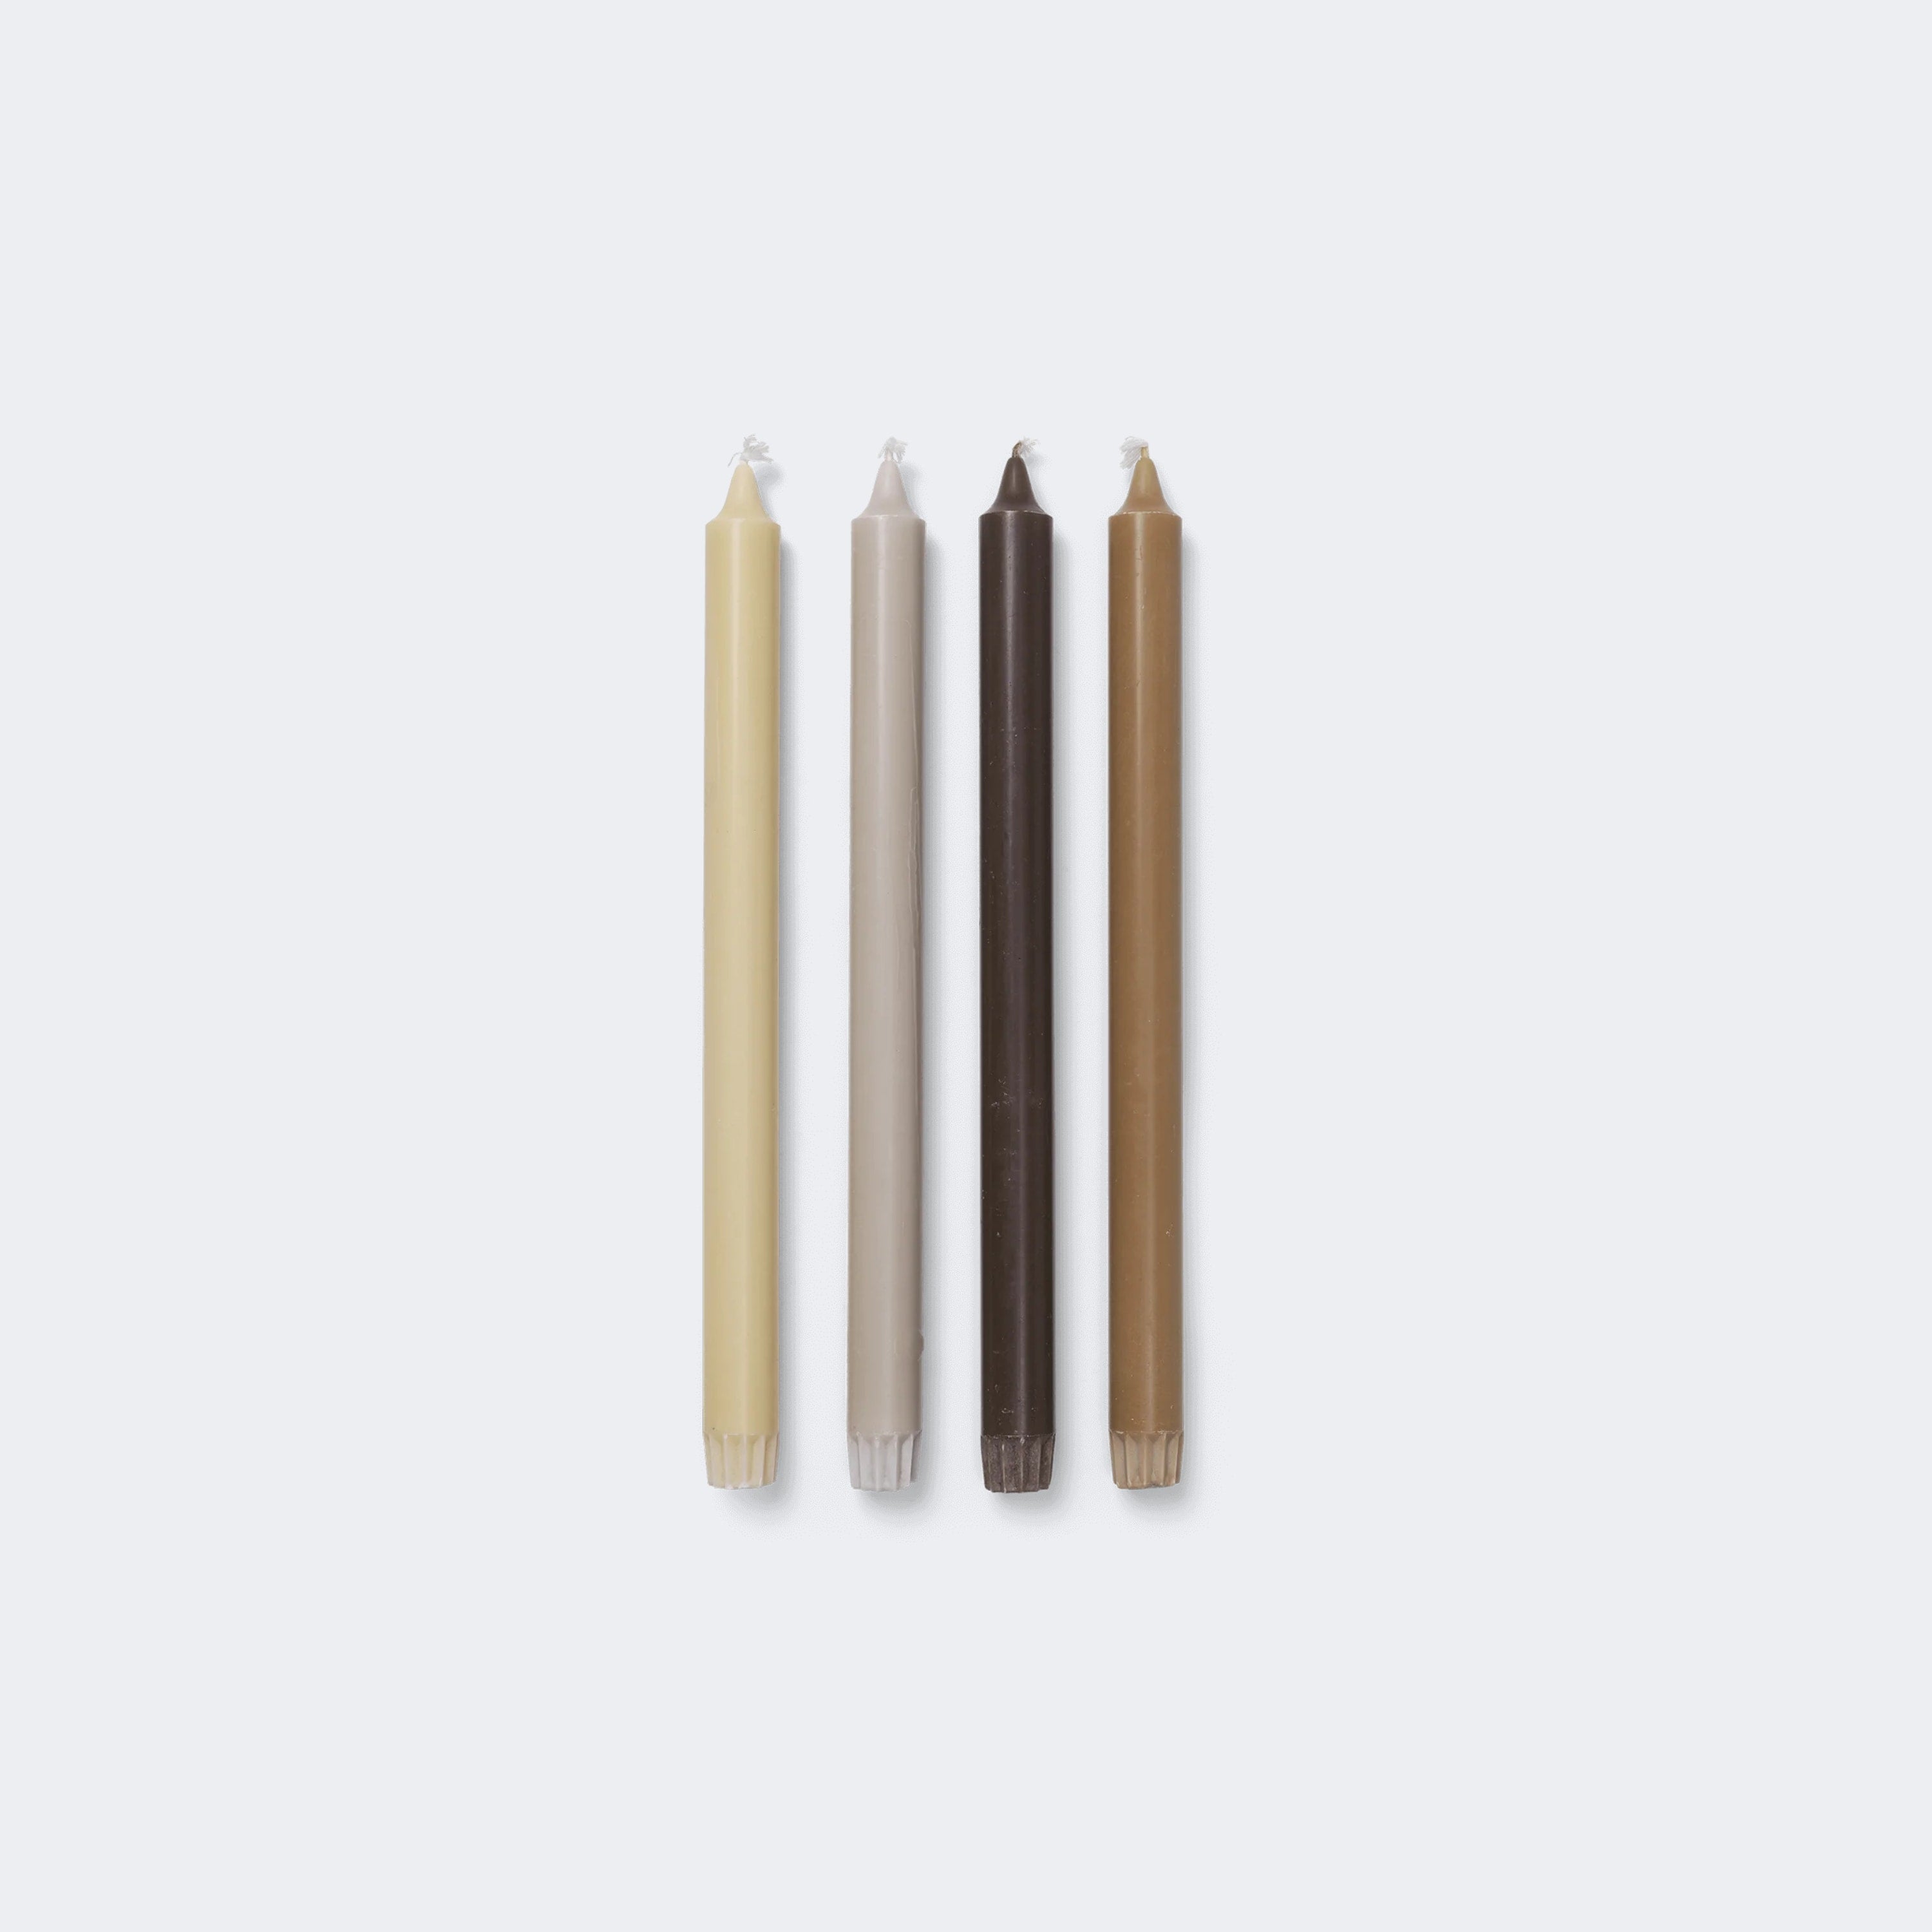 Ferm Living Pure Candles - Set of 4 - KANSO